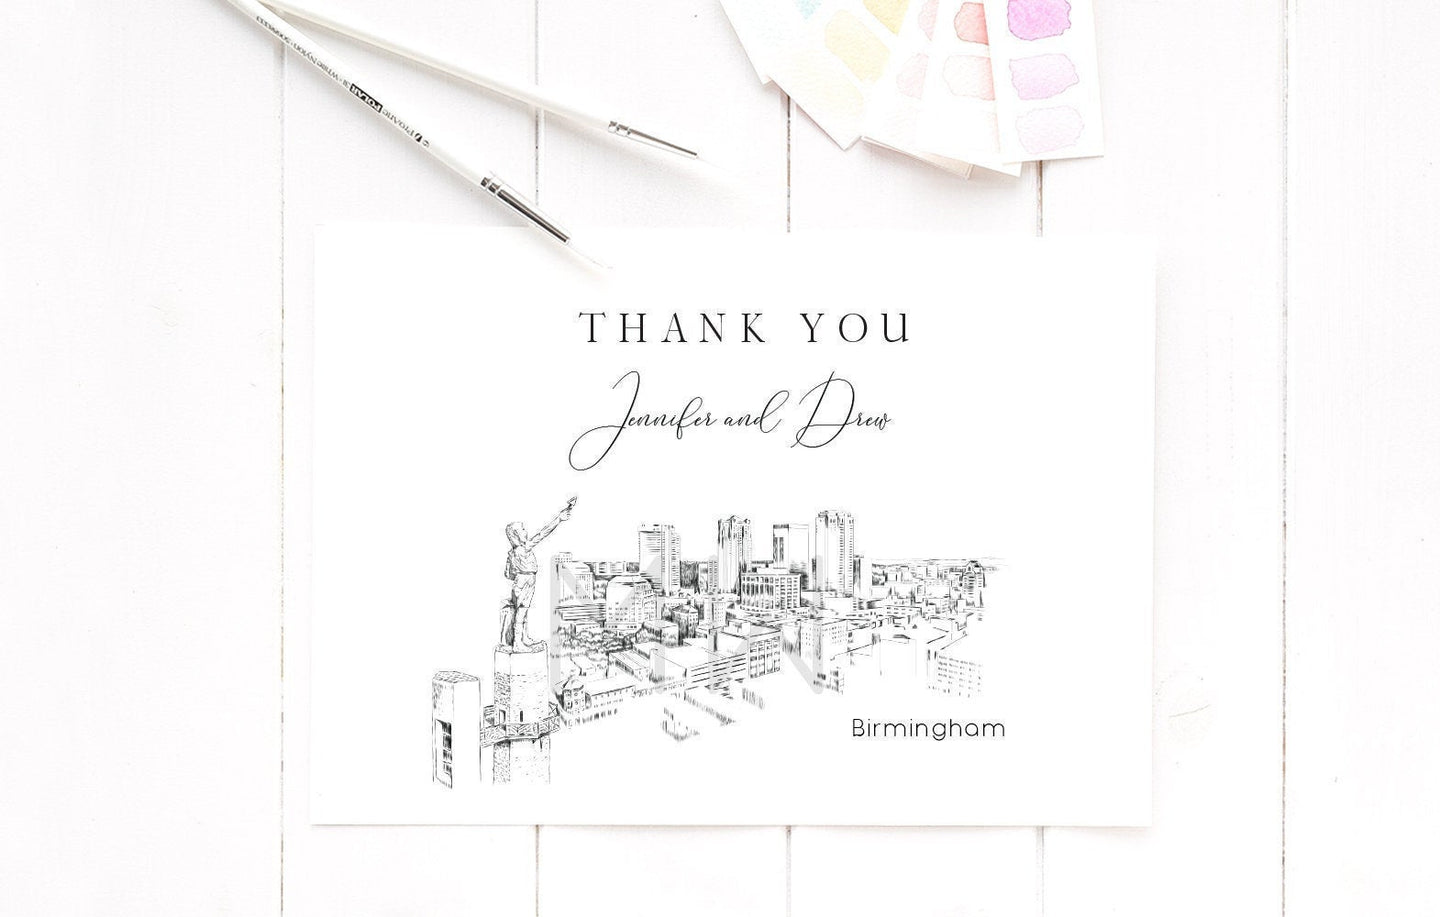 Birmingham Skyline Thank You Cards, Personal Note Cards, Bridal Shower Thank you Card Set, Corporate Thank you Cards (set of 25 cards)